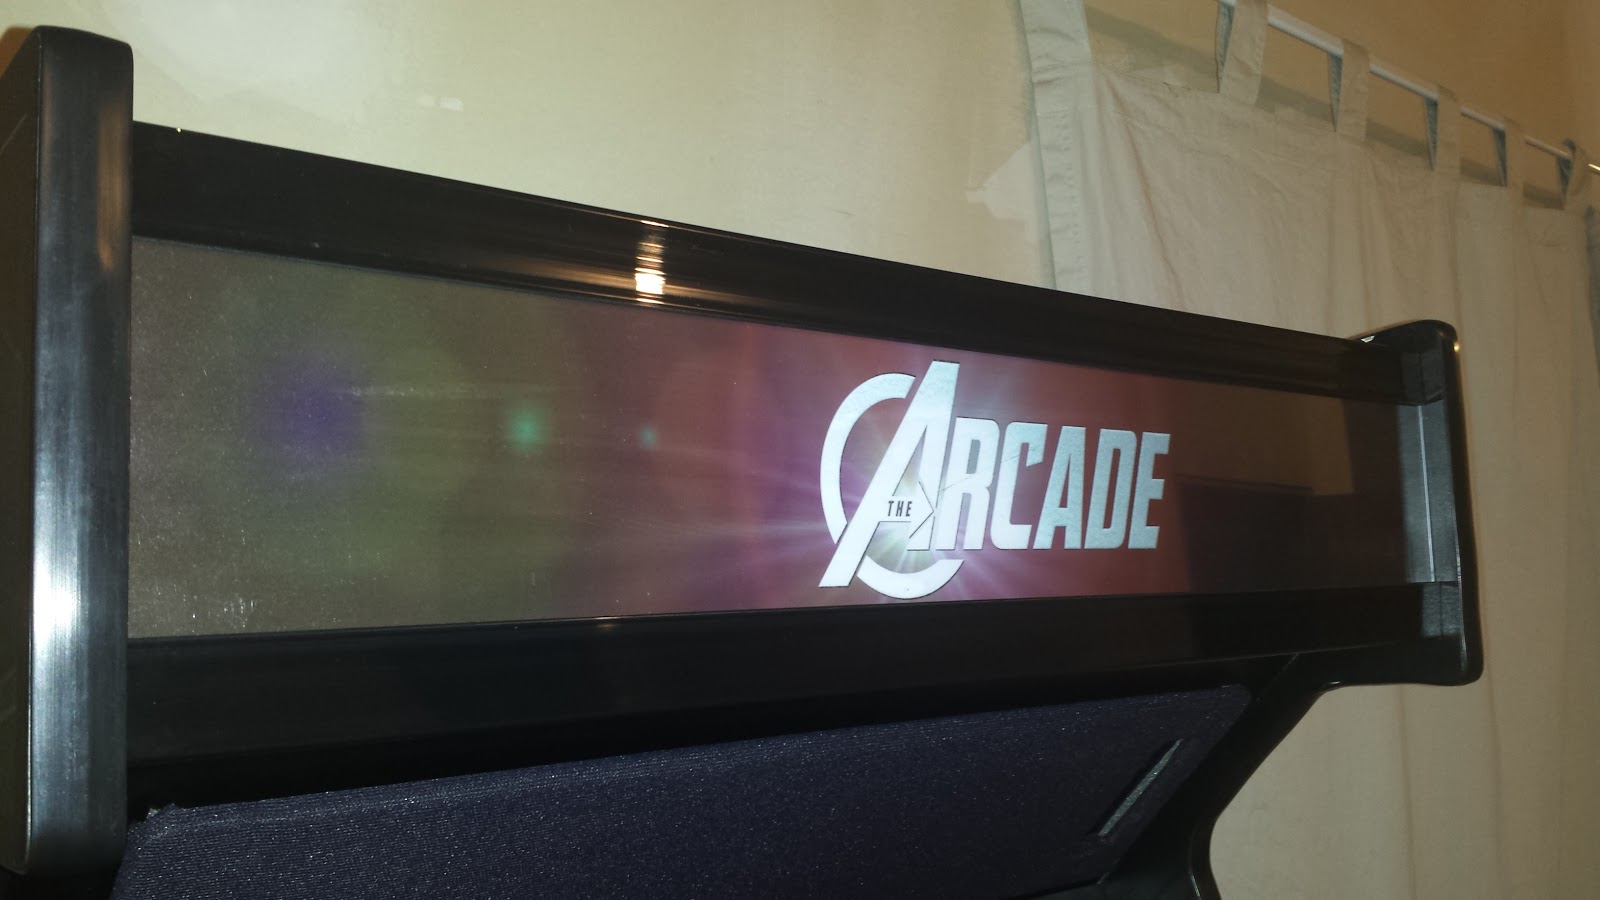 Unlit arcade marquee. Text on the marquee reads "The Arcade", with the "A" styled like the "A" in the Avengers logo.